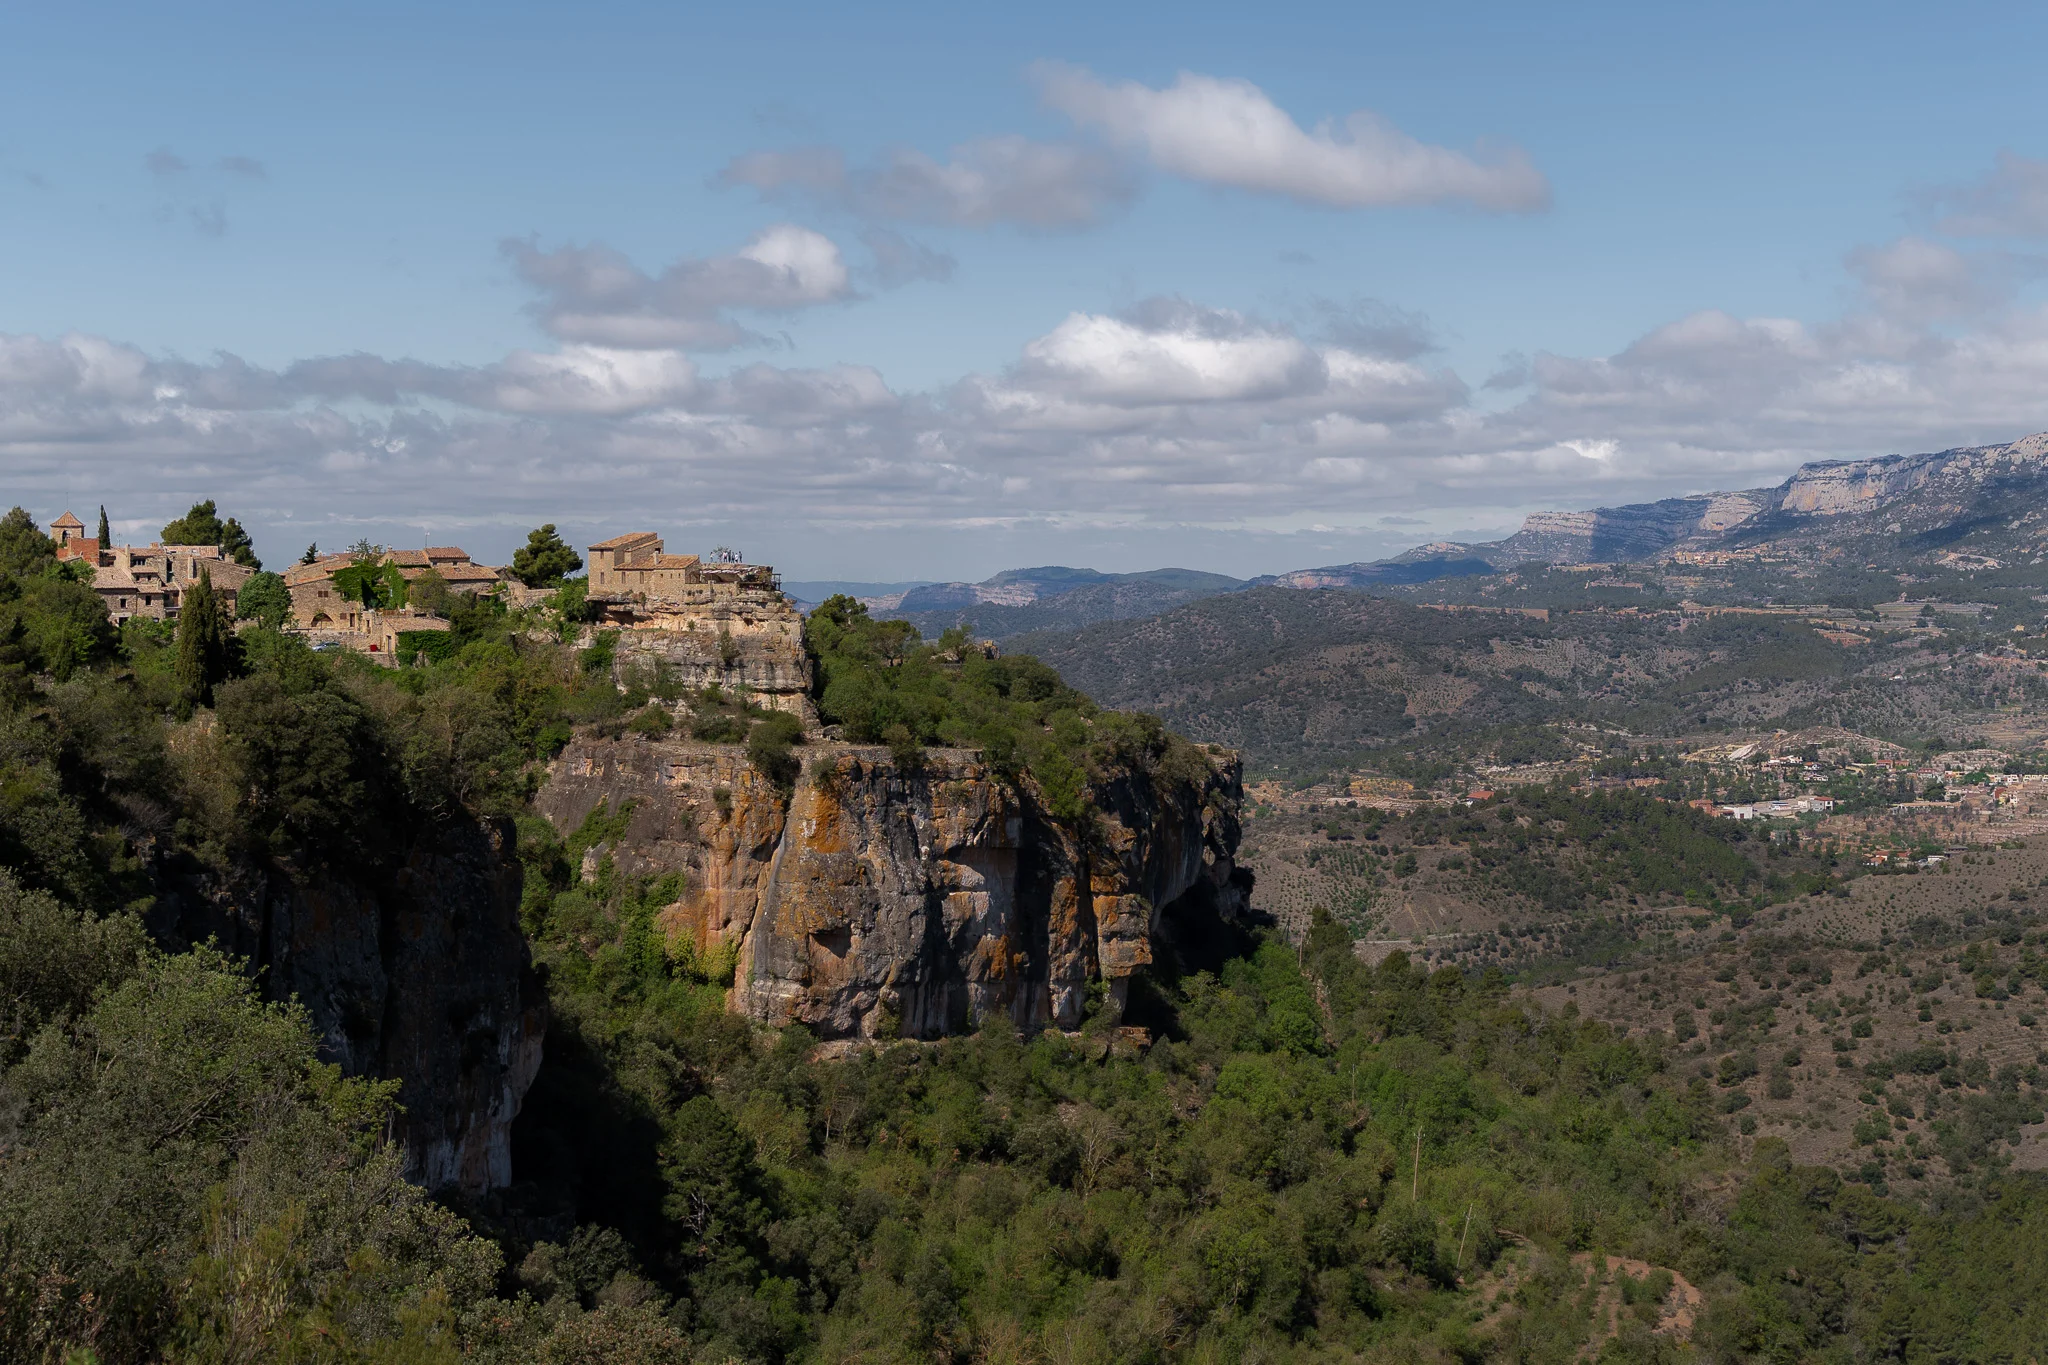 Siurana, Spain - picturesque mountaintop village located on a cliff